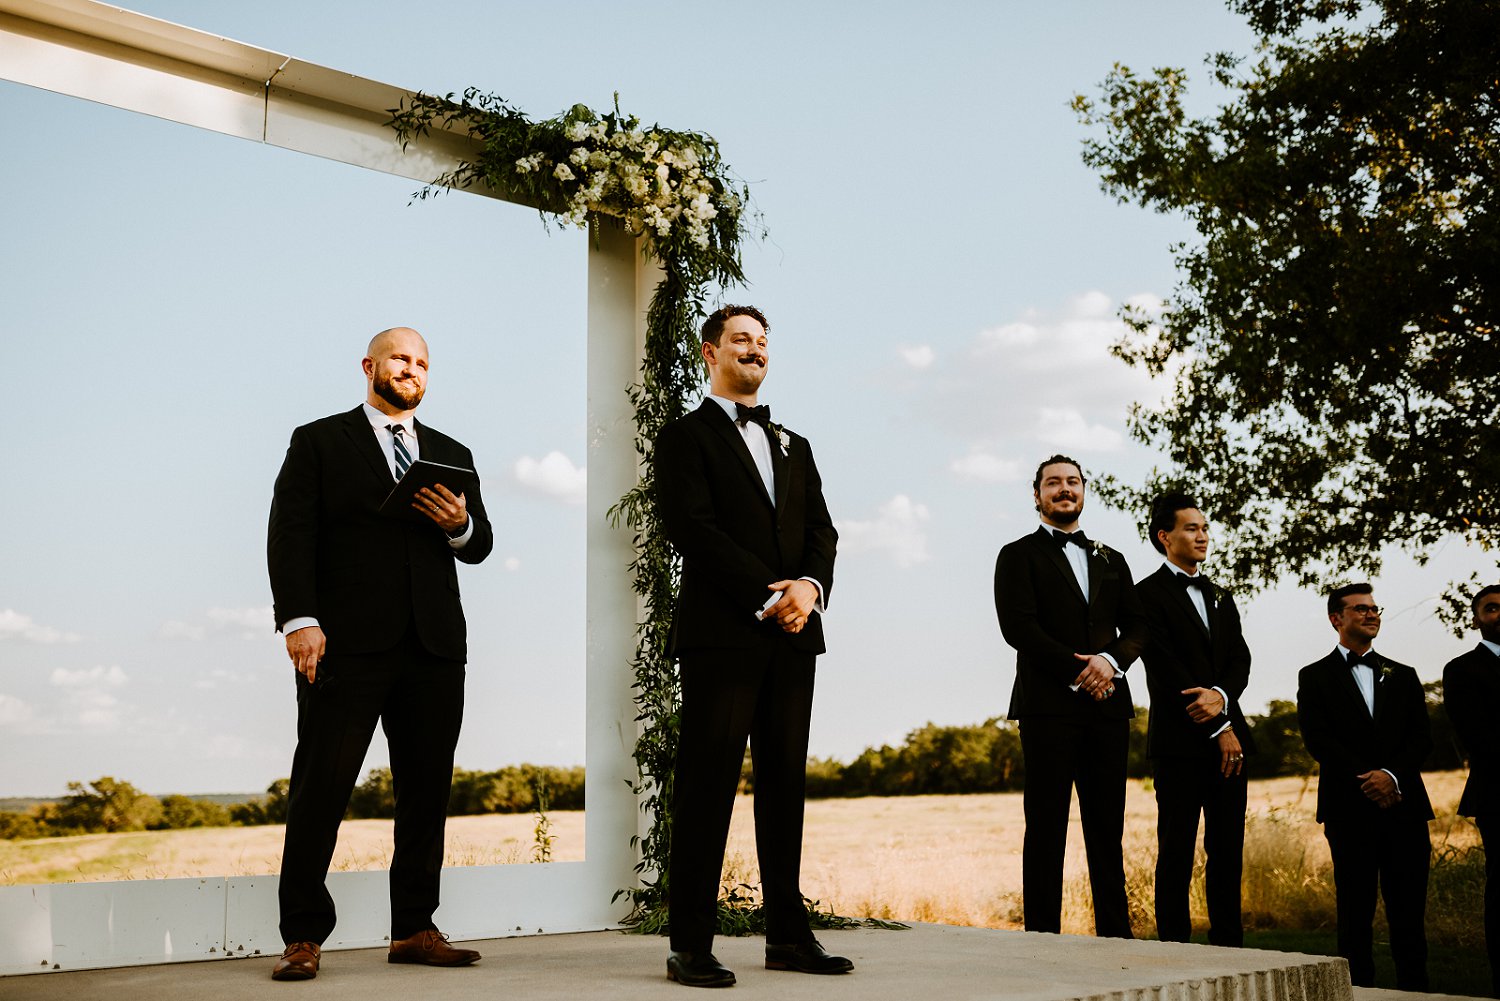 austin hill country prospect house wedding